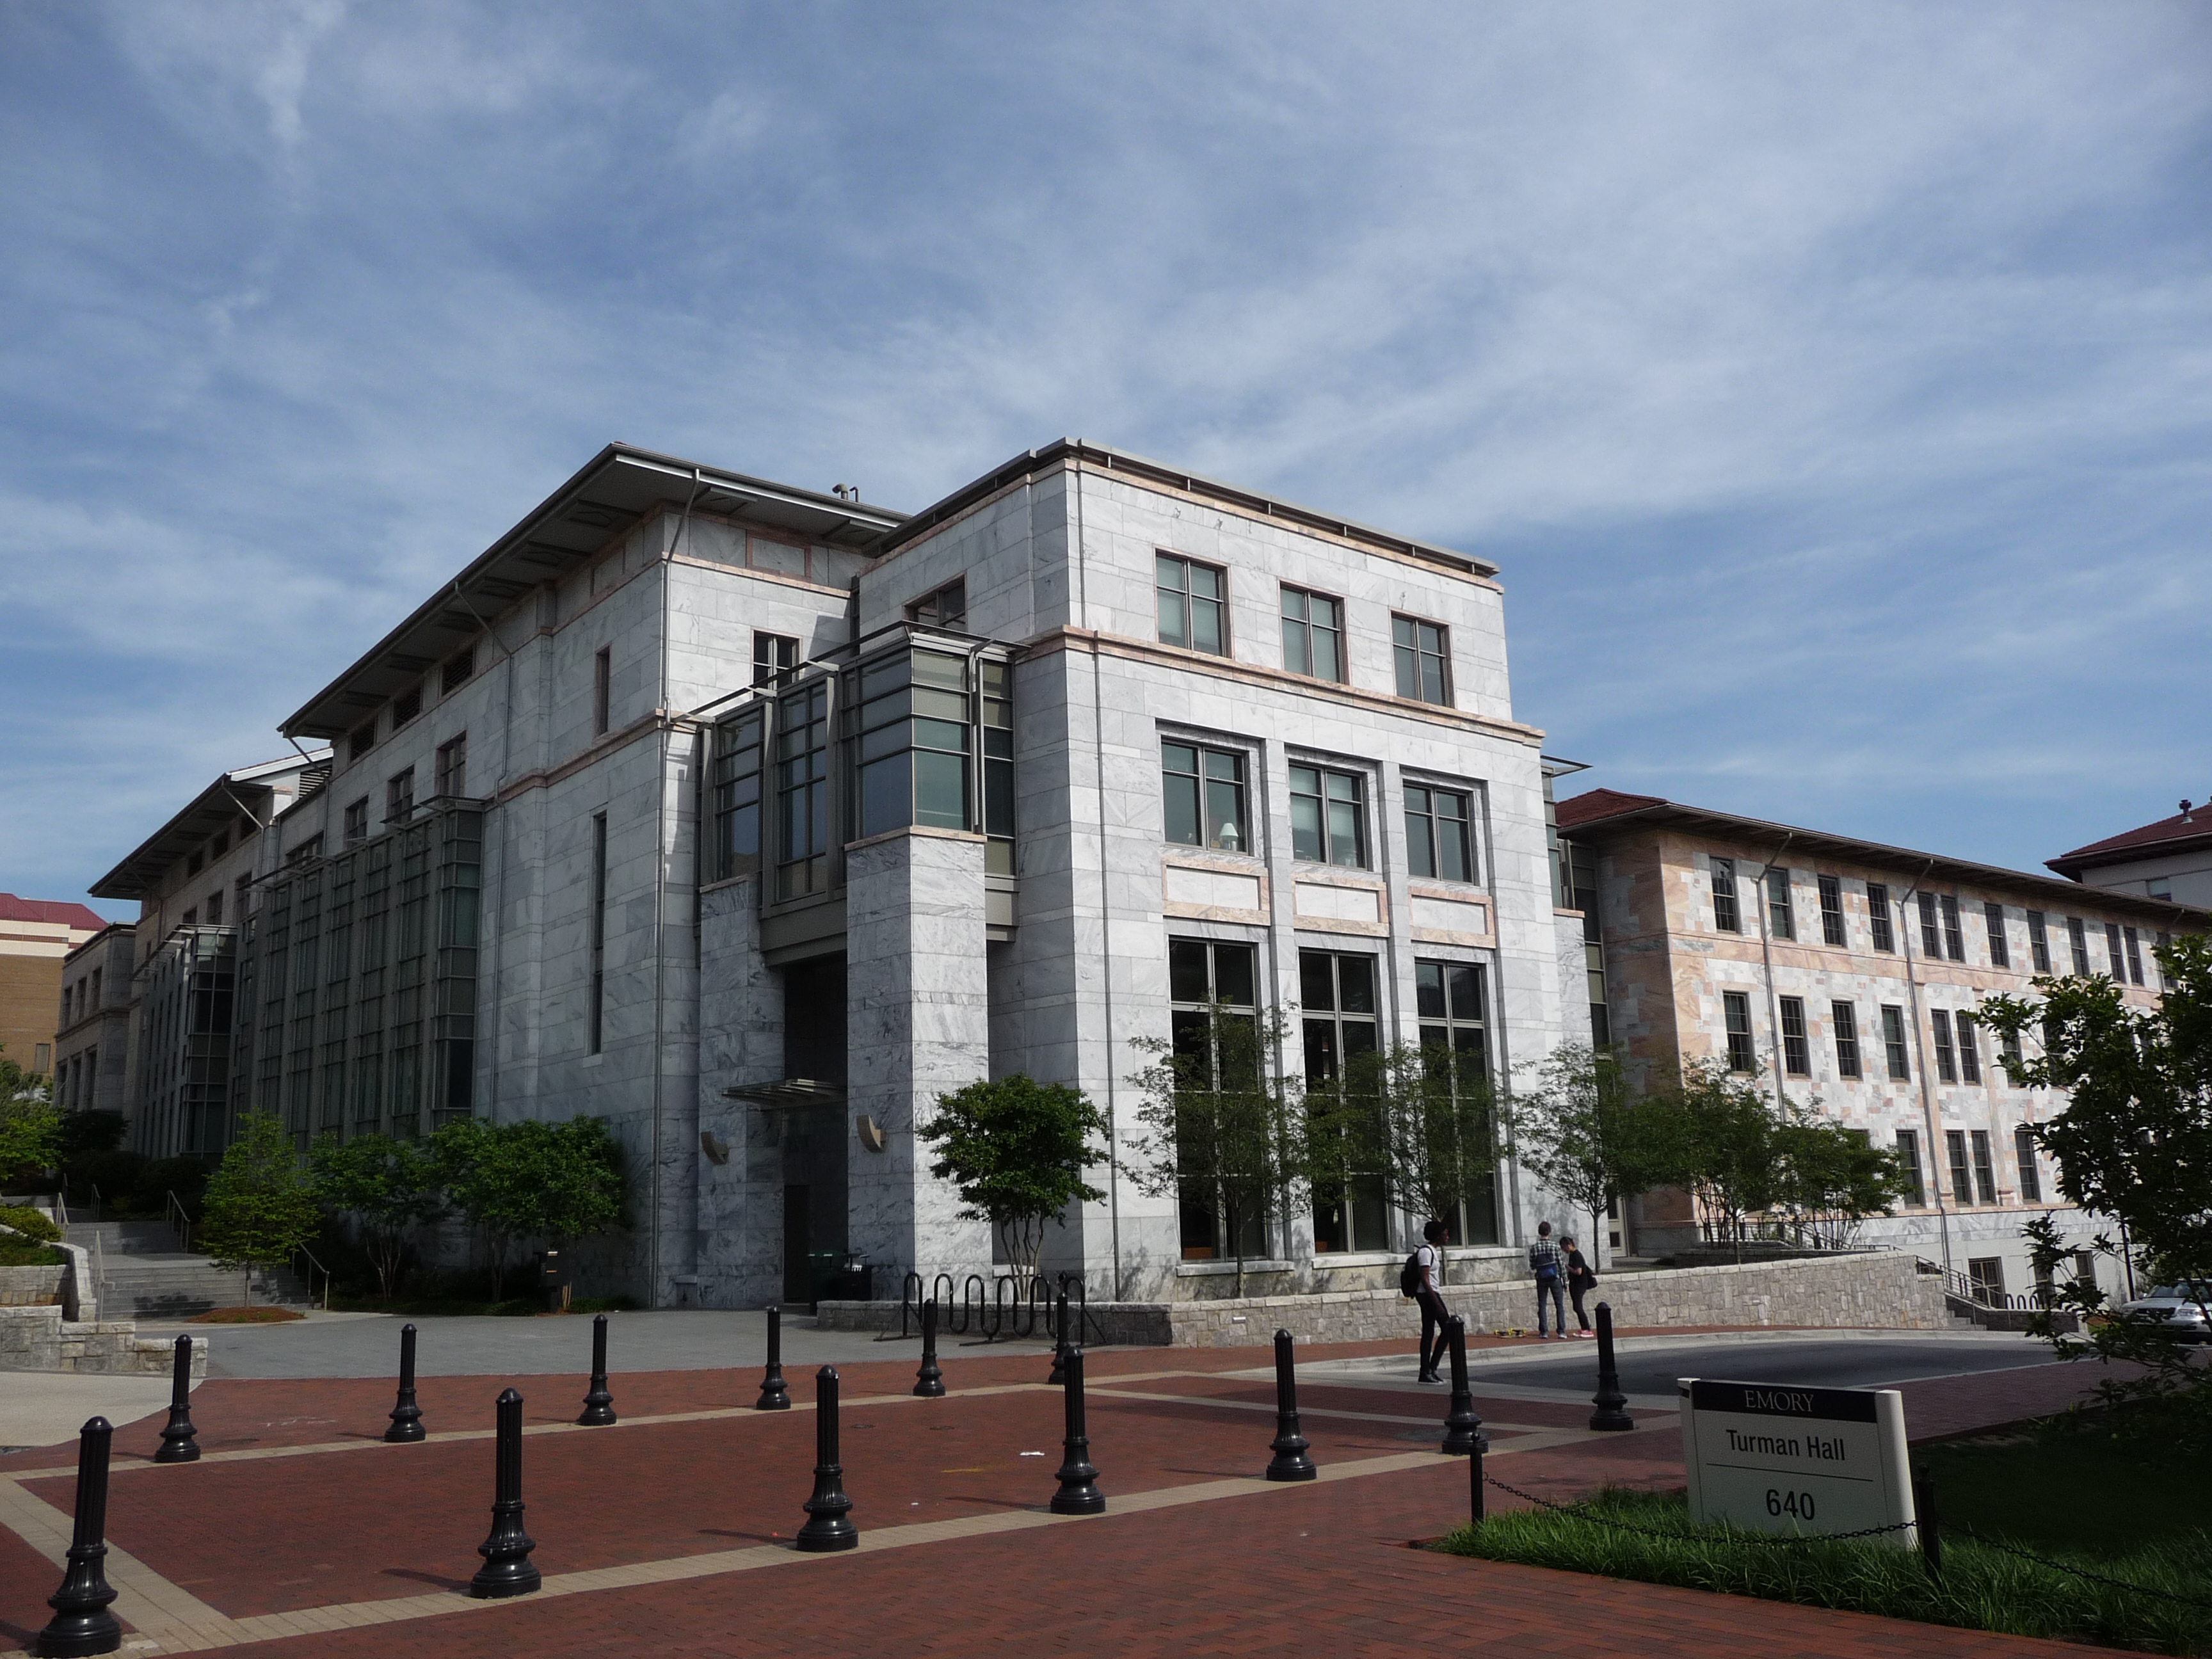 File:Emory University - Charles and Peggy Evans Anatomy Building.JPG ...